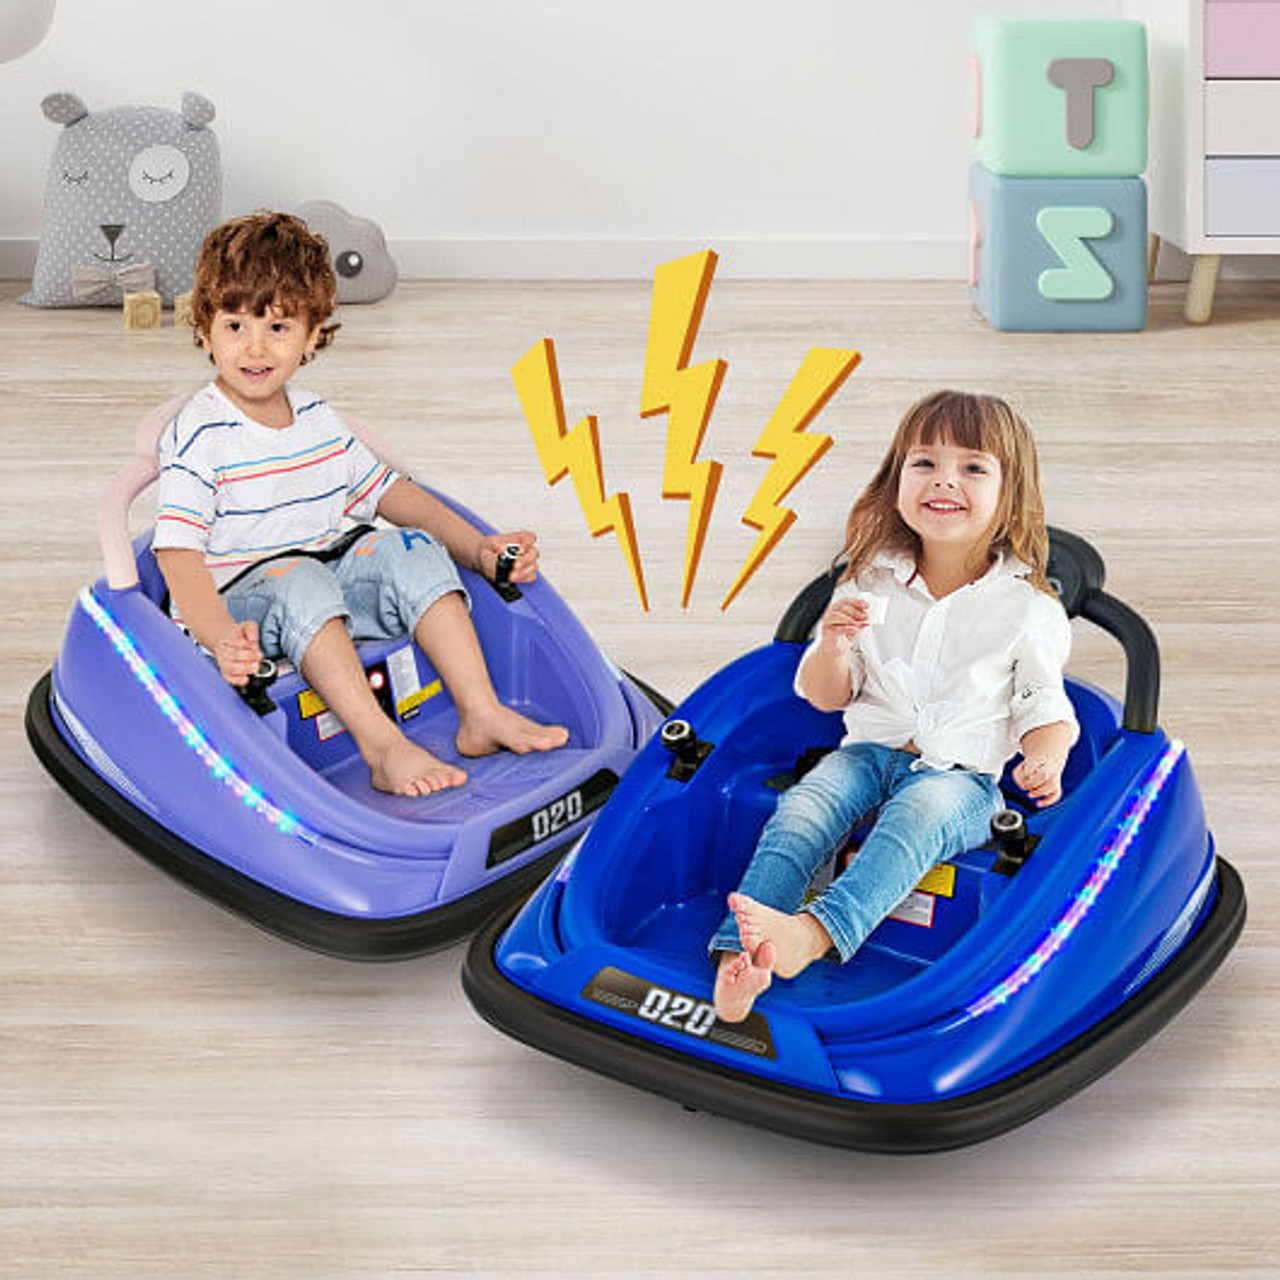 12V Kids Bumper Car Ride on Toy with Remote Control and 360 Degree Spin Rotation-Black